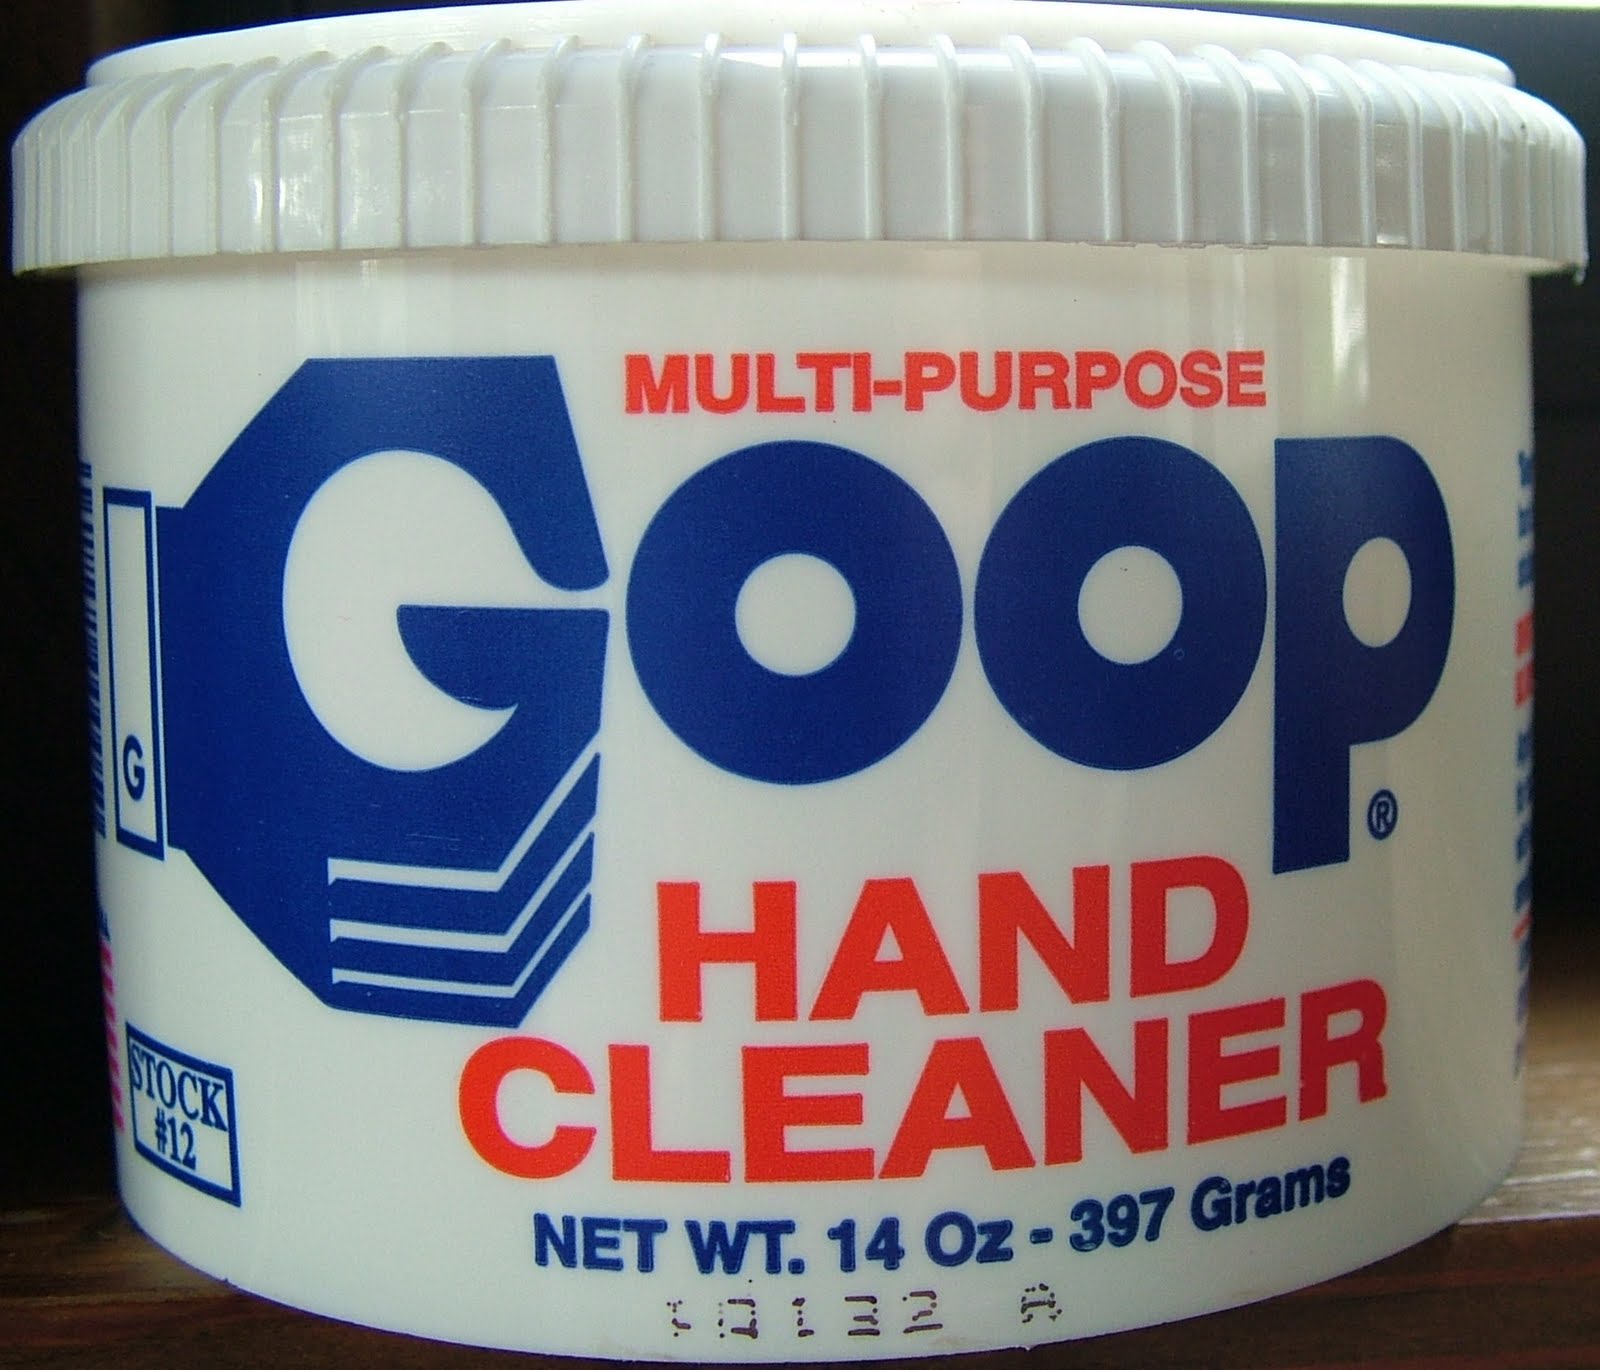 Goop Hand Cleaner and Stain Removers, All Goop Cleaners